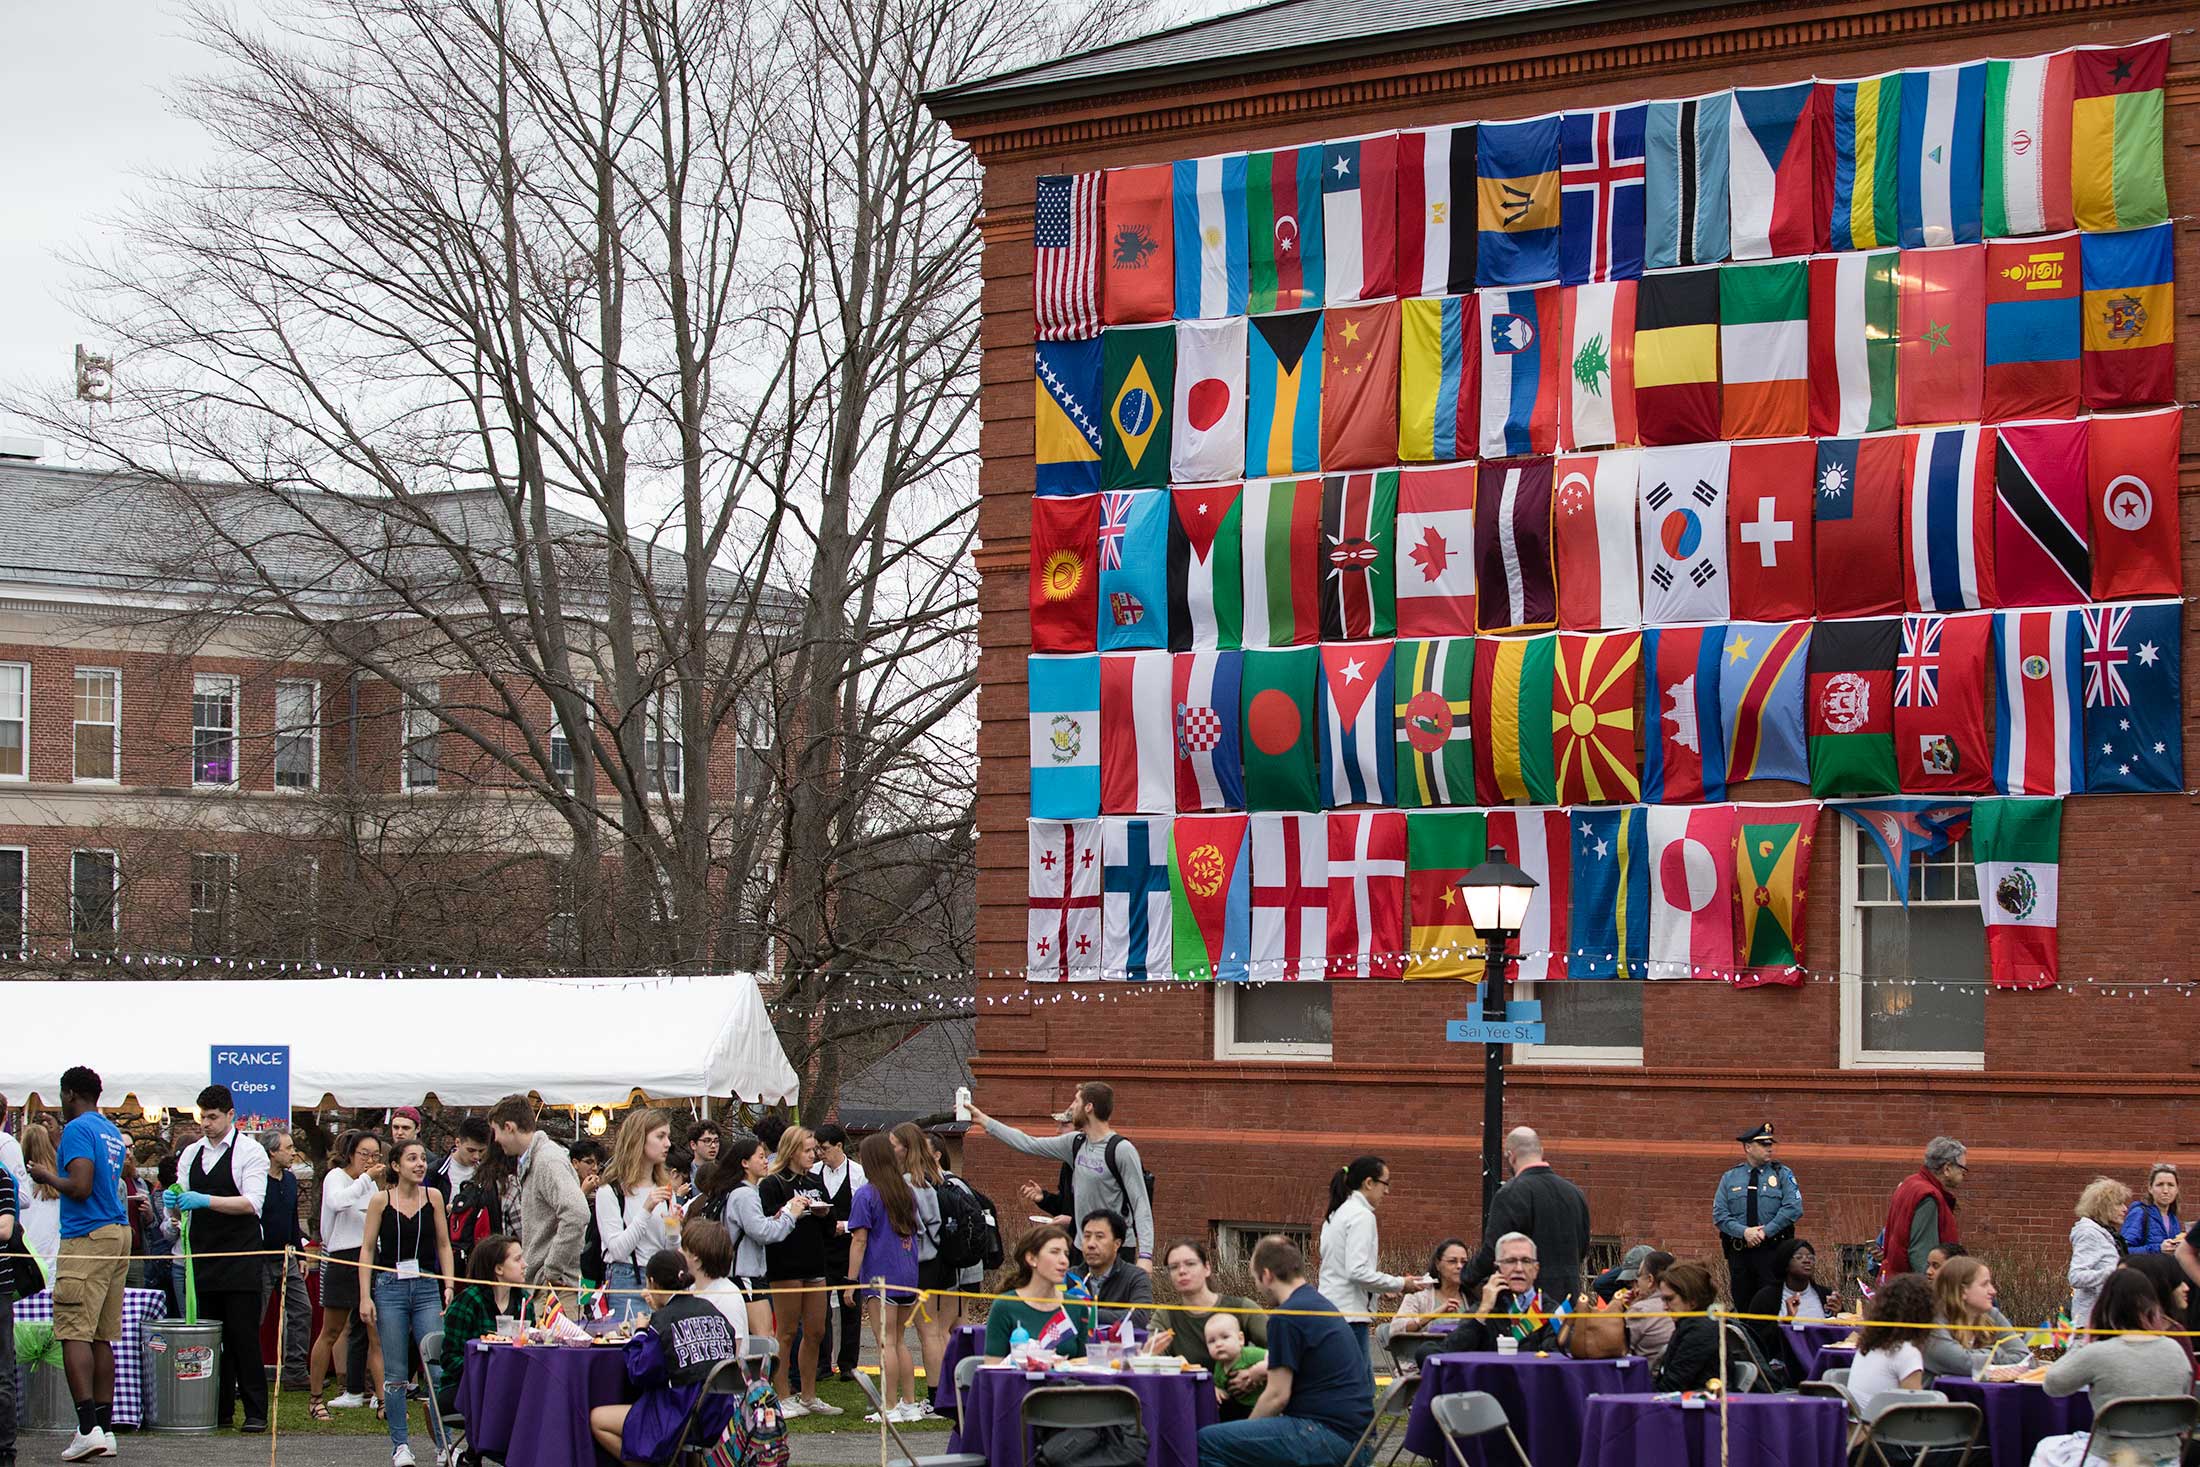 Flags from around the world are showcased at the City Streets celebration at Amherst College